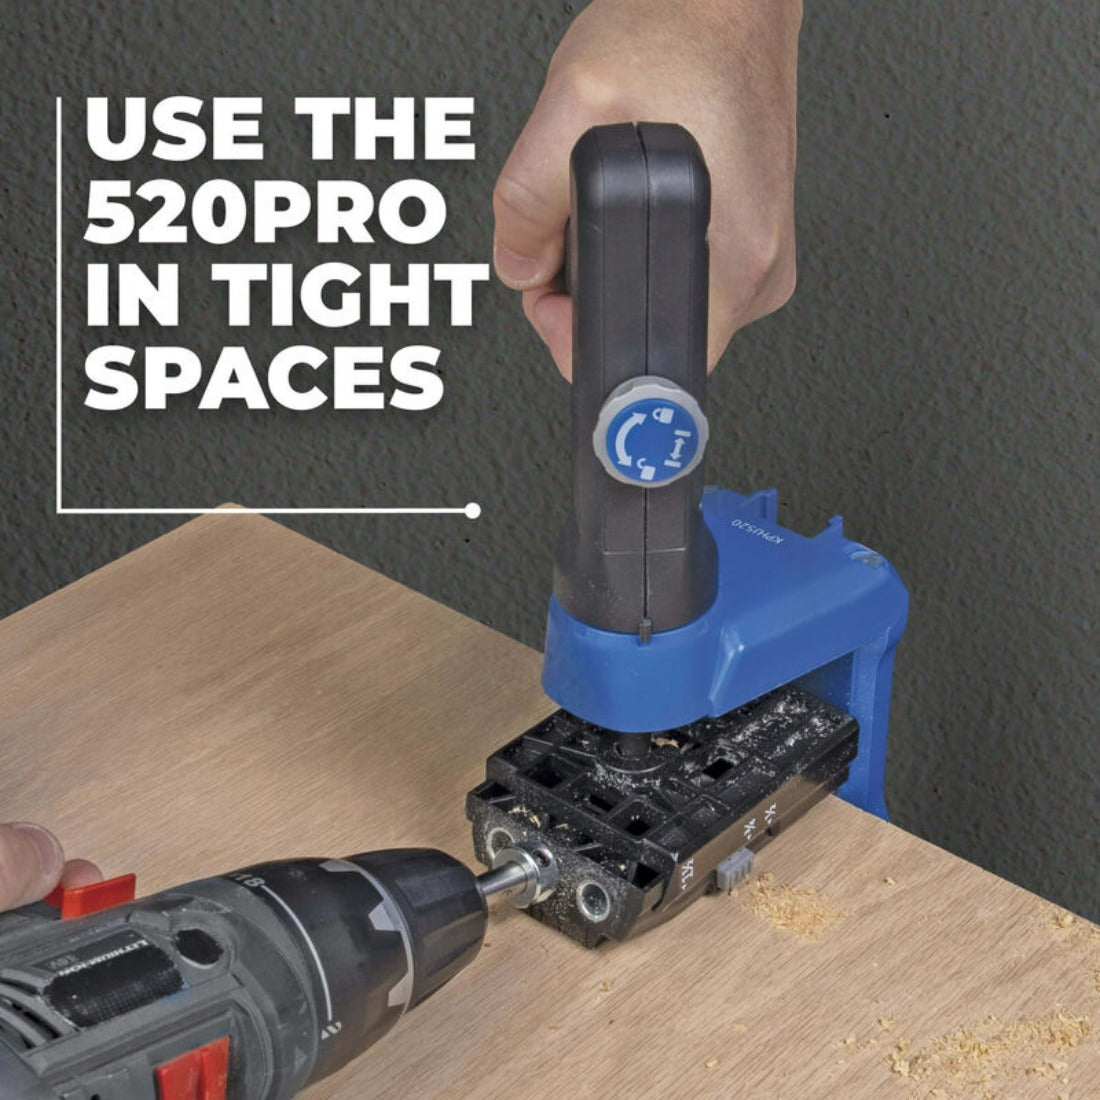 image shows the kreg 520pro handle swivelled into position and holding the jig in place while being drilled for pocket holes, text in image is "use the 520pro in tight spaces